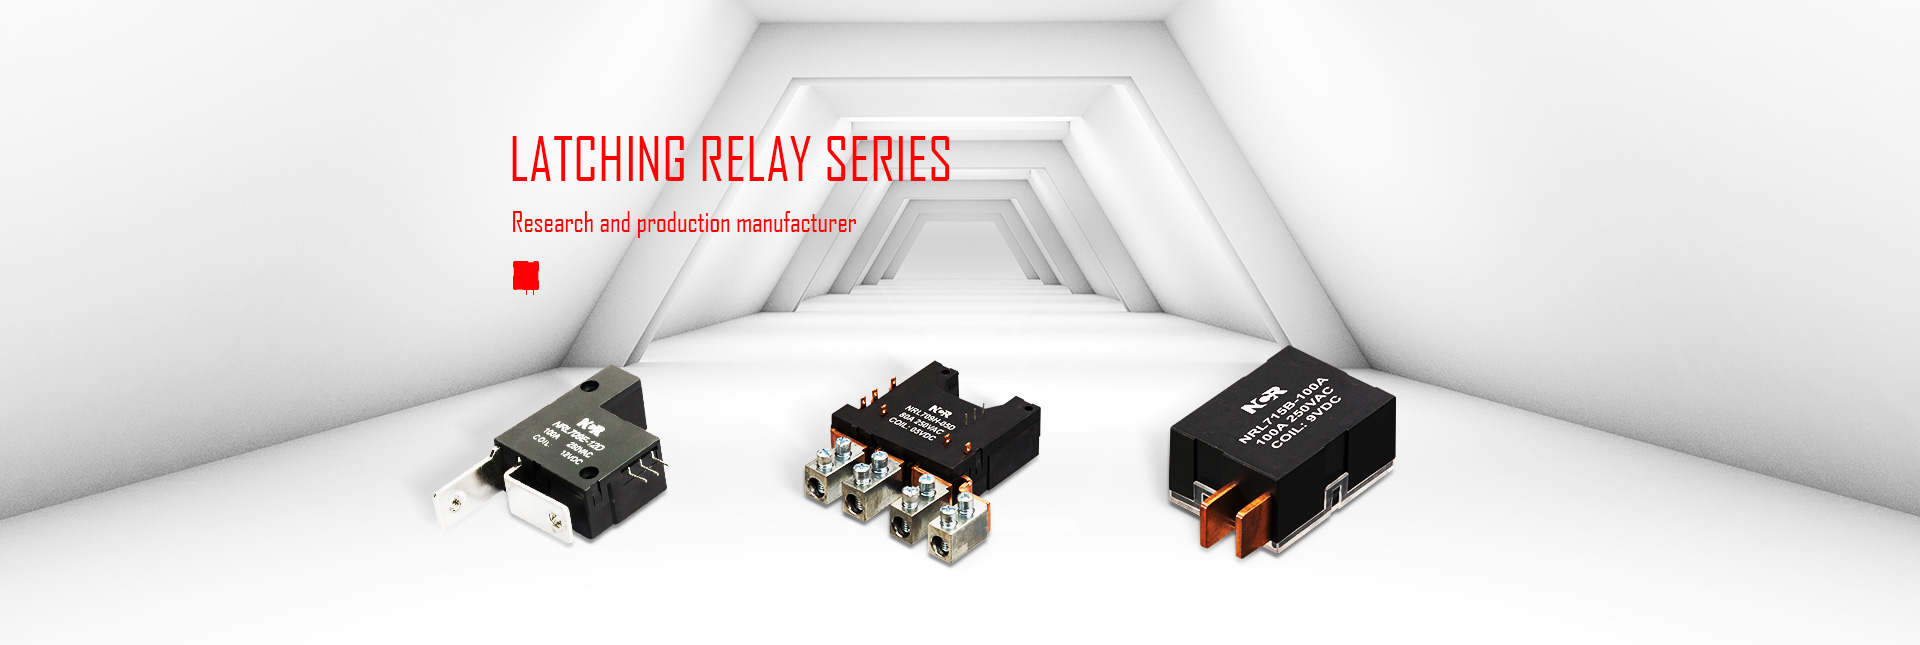 New Latching Relay